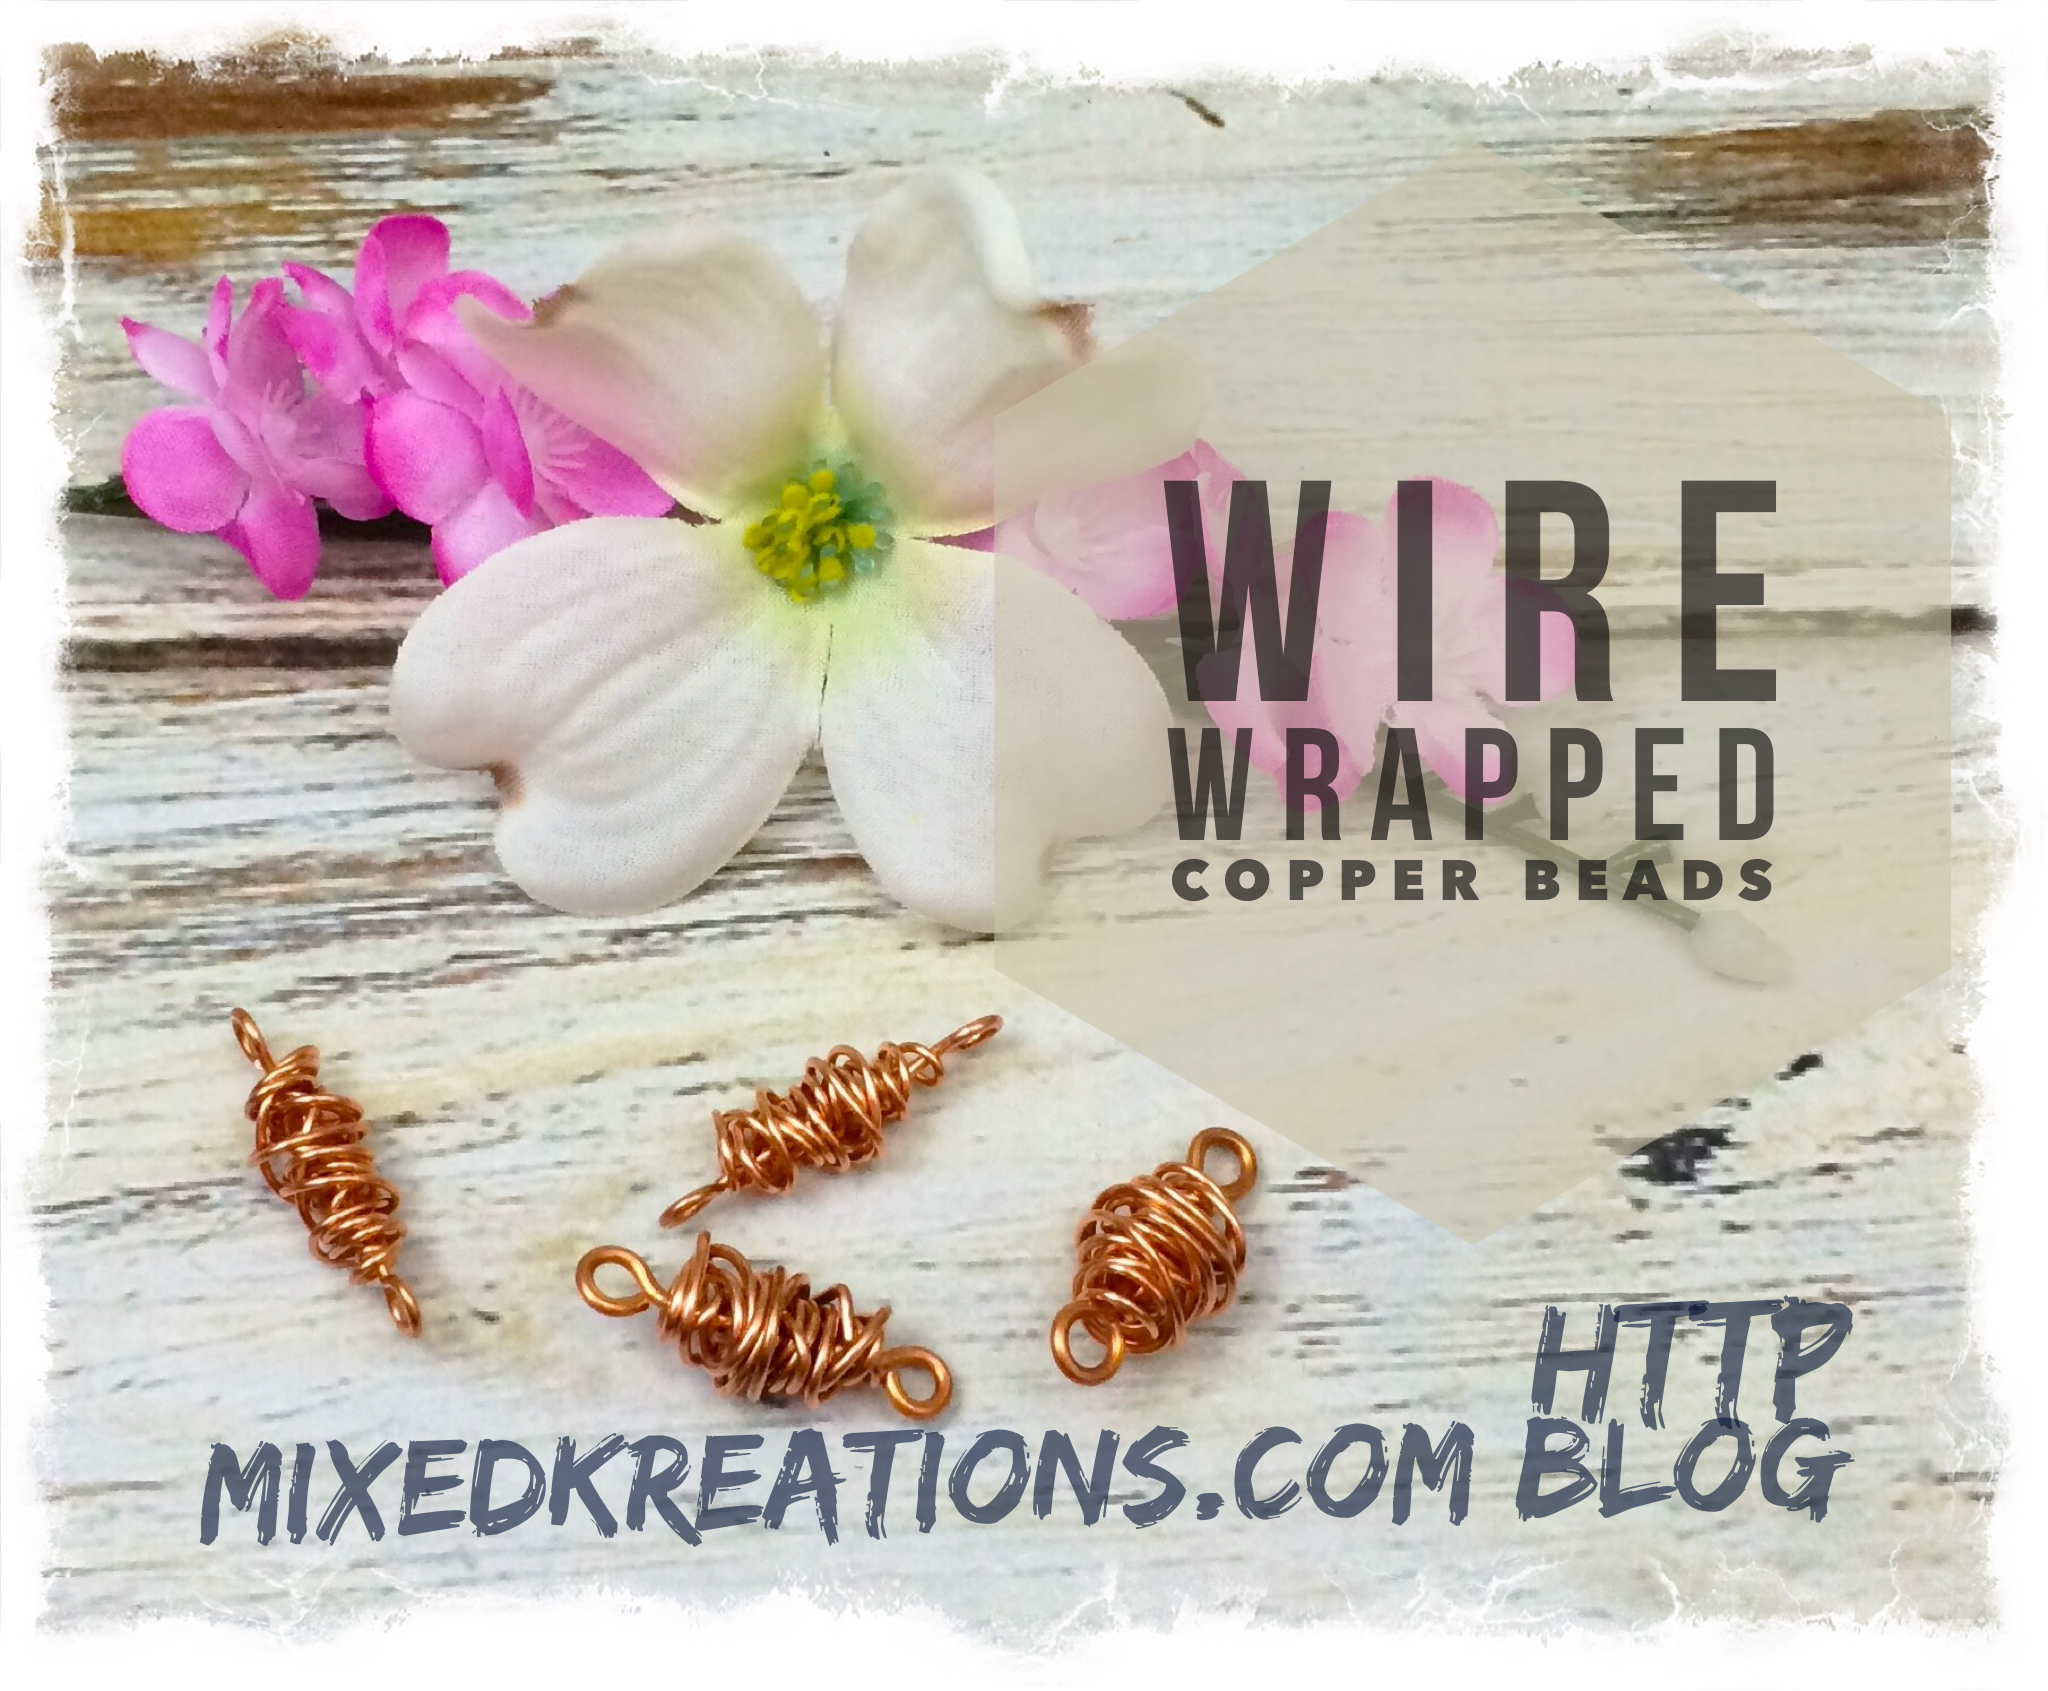 How to make wire wrapped copper beads